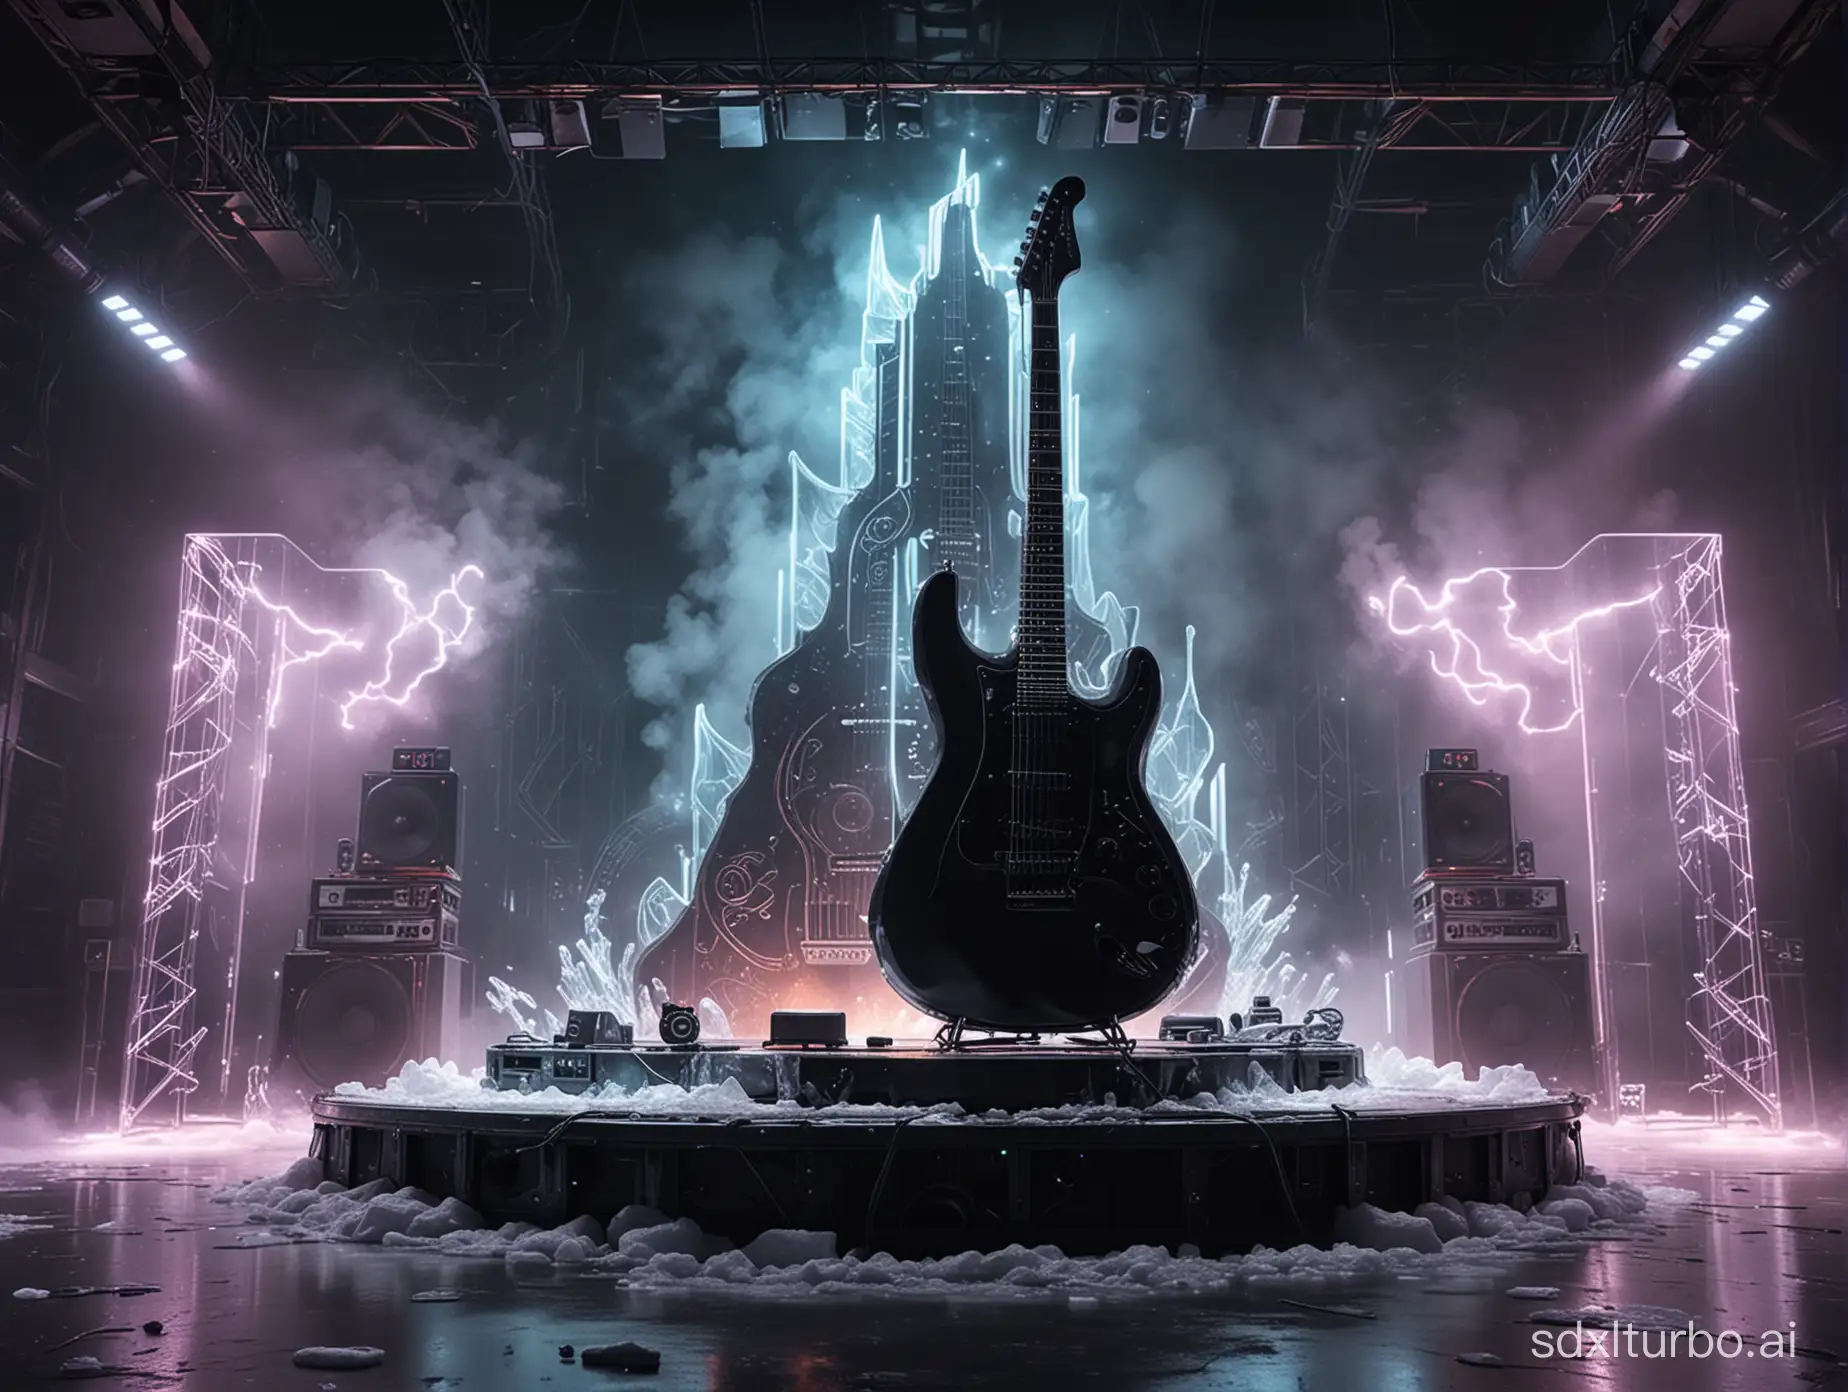 A sci-fi platform with a huge tilted guitar silhouette adorning the background, flanked by speakers, a metal floor flanked by ice decorations, night, neon lights, smoke